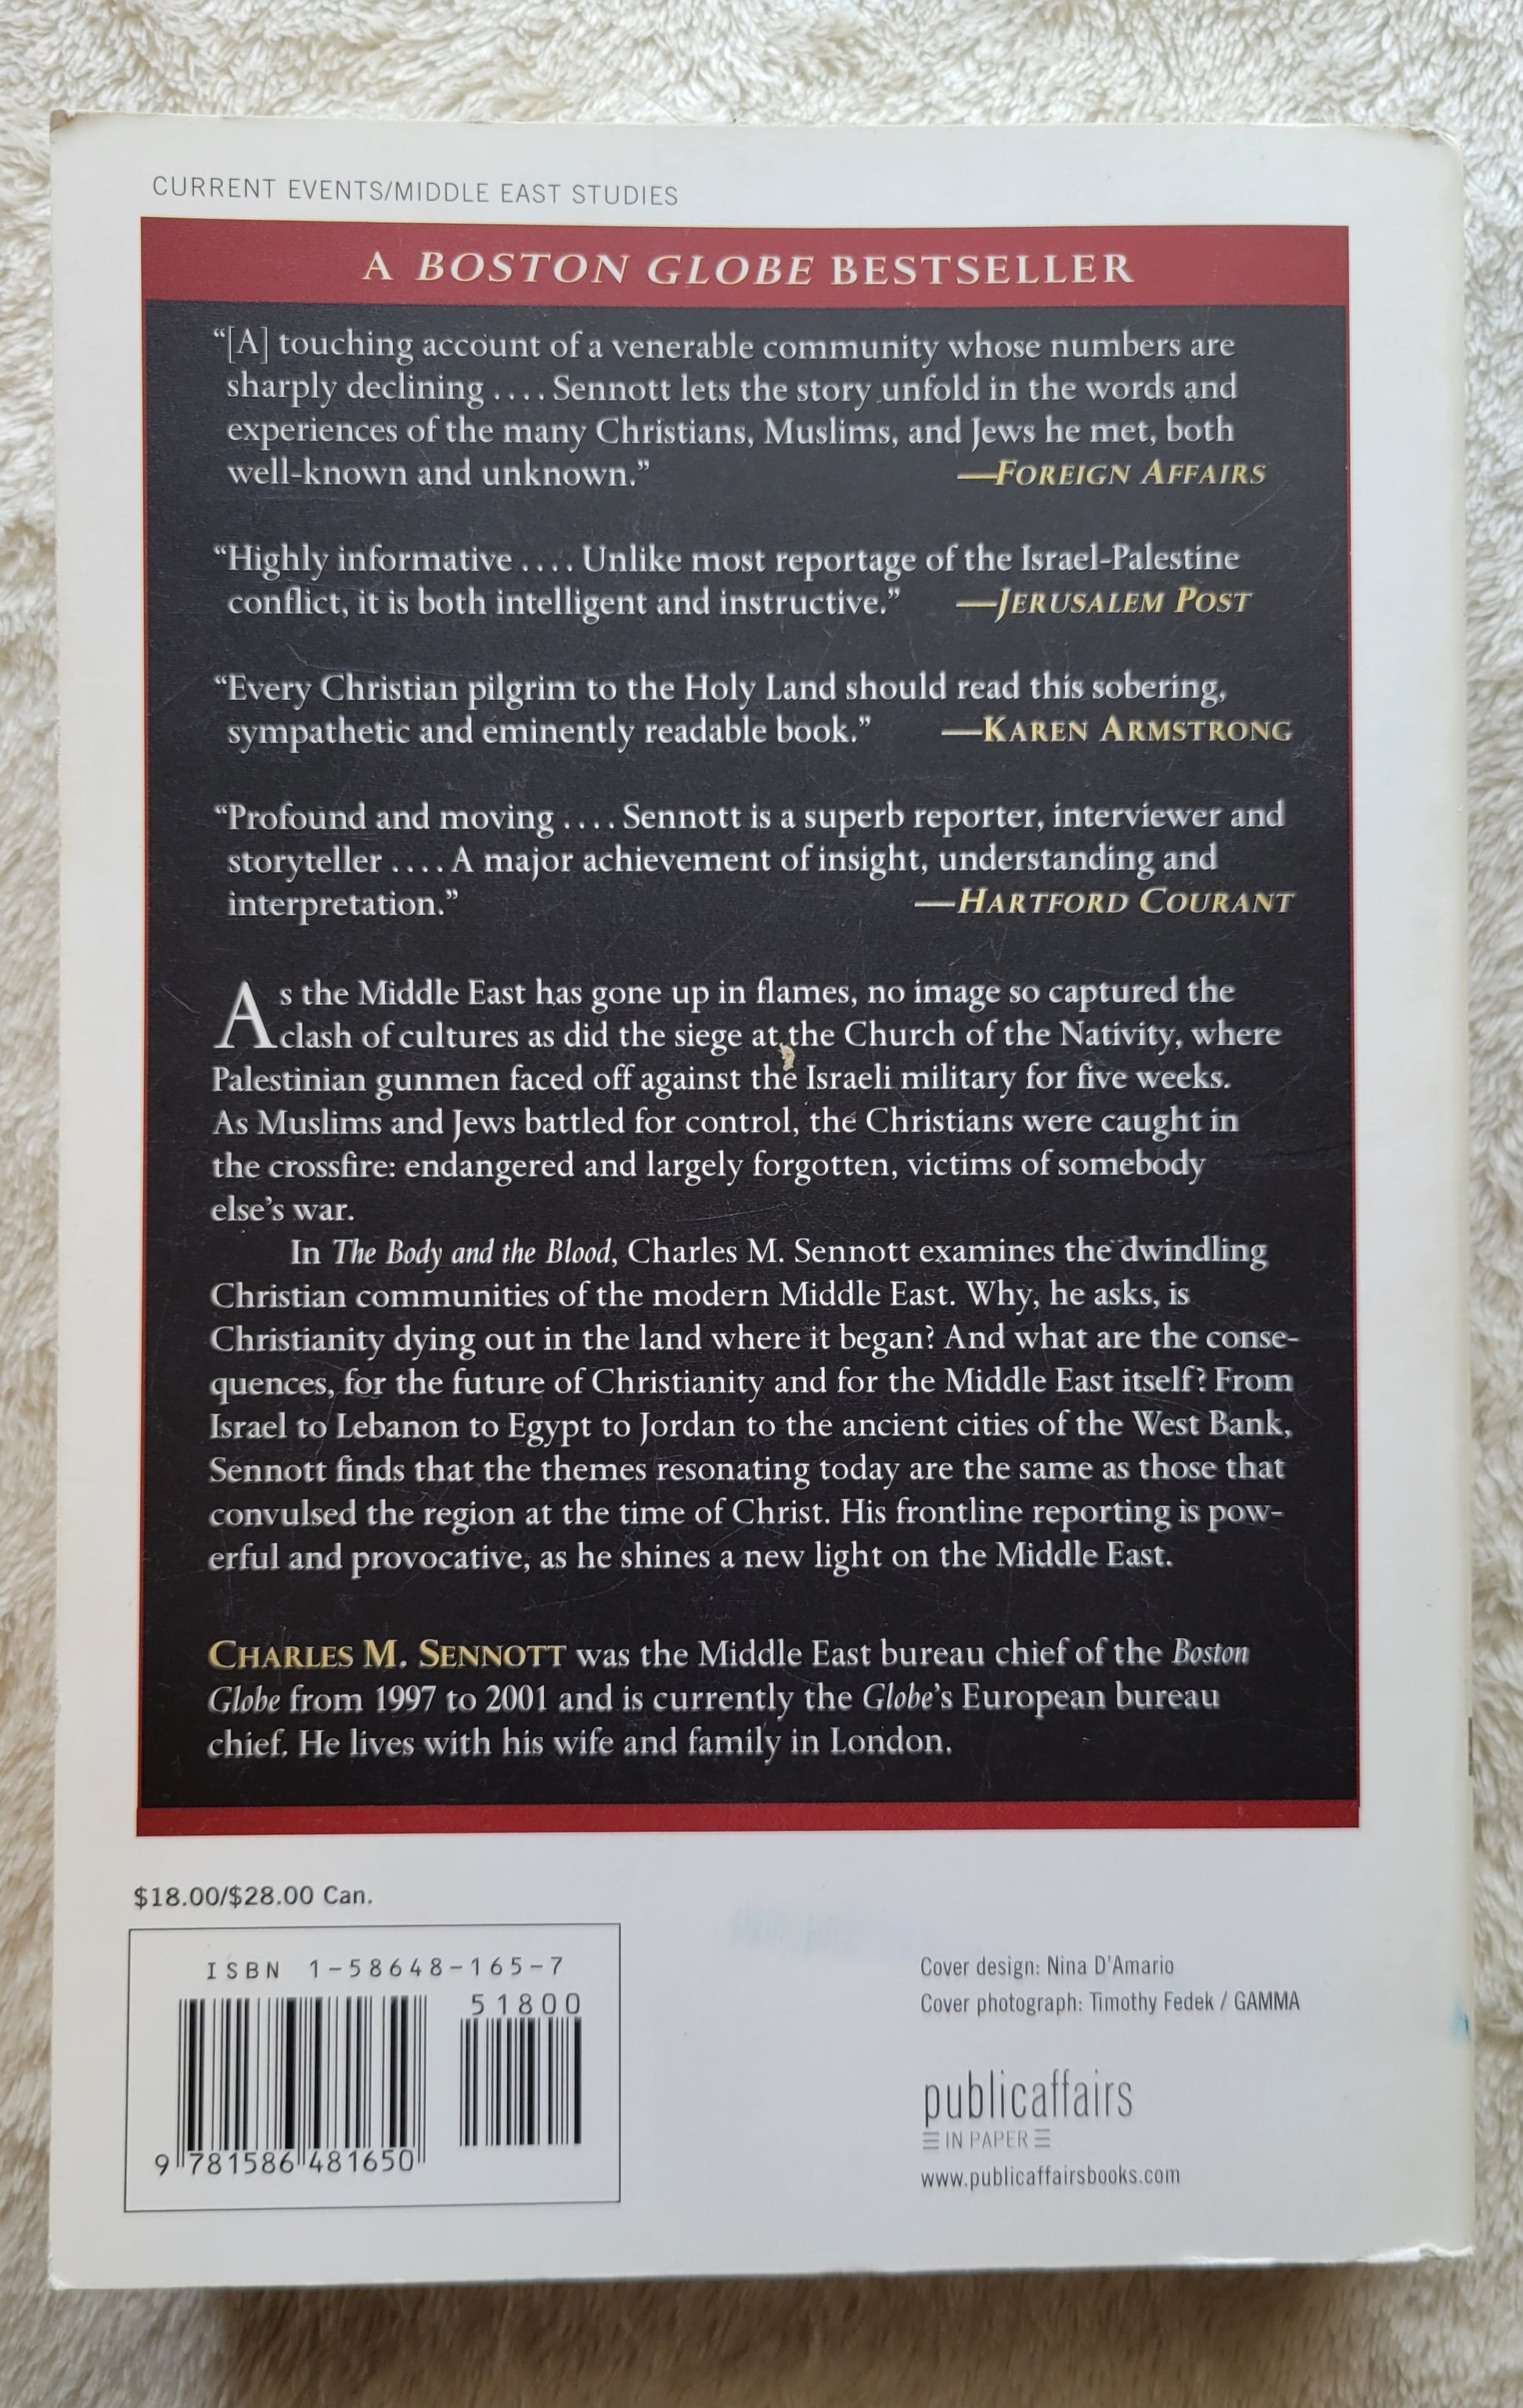 Used book for sale "The Body and the Blood: The Middle East's Vanishing Christians and the Possibility for Peace" by Charles M. Sennott, published in 2003 by PublicAffairs, a member of the Perseus Books Group. Back cover.